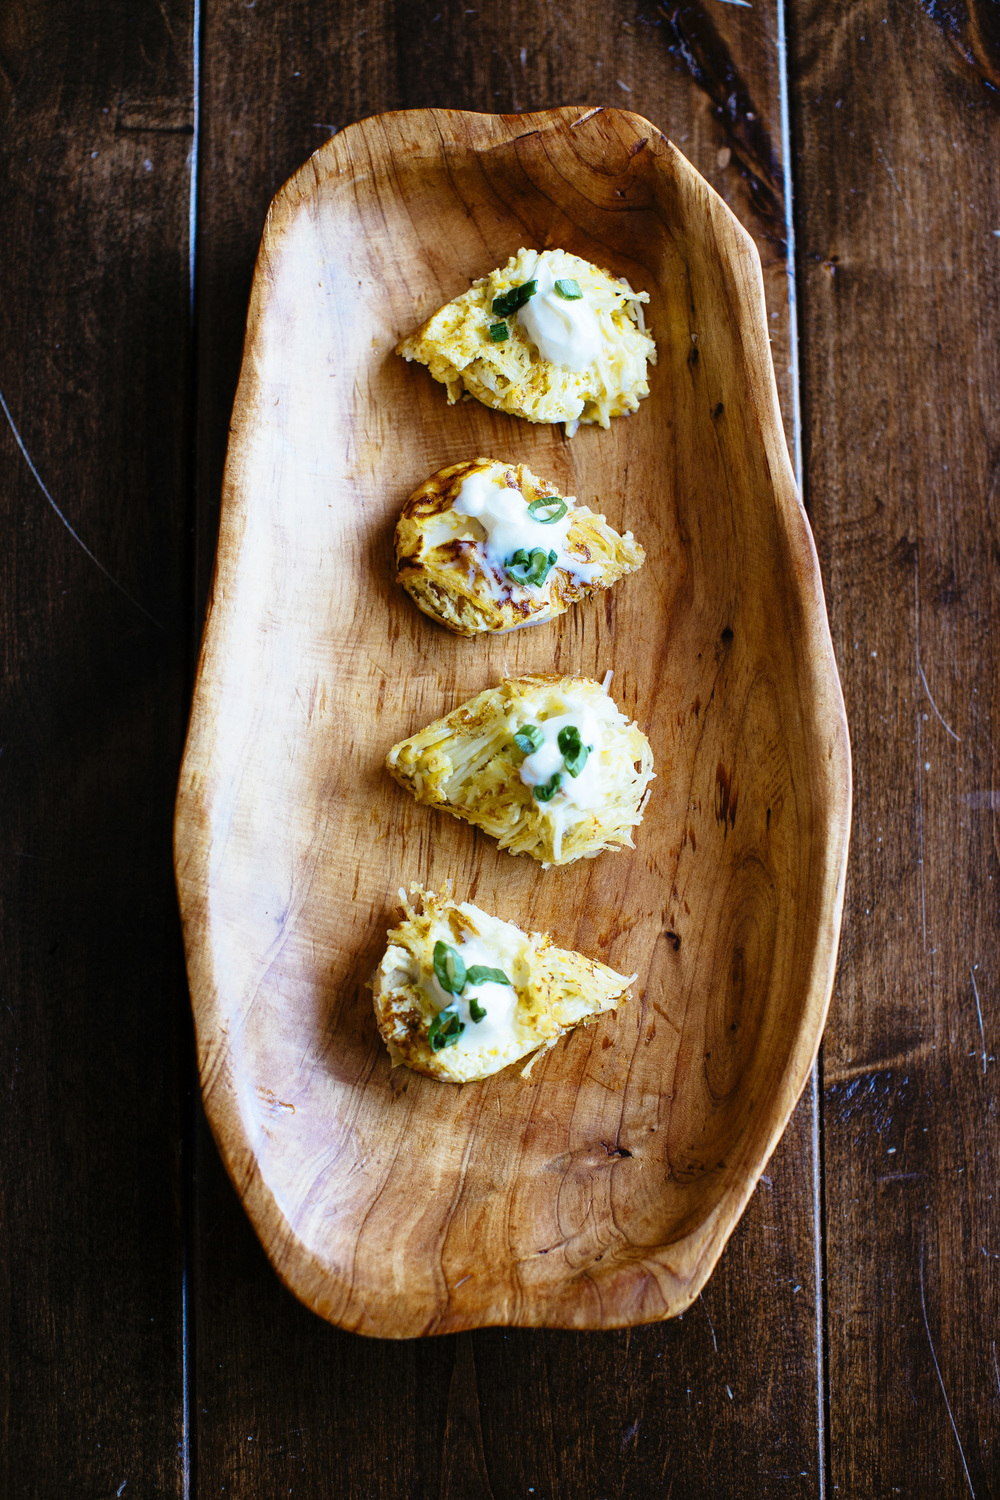 Angel Hair and Artichoke Frittata with Creme Fraiche and Chives